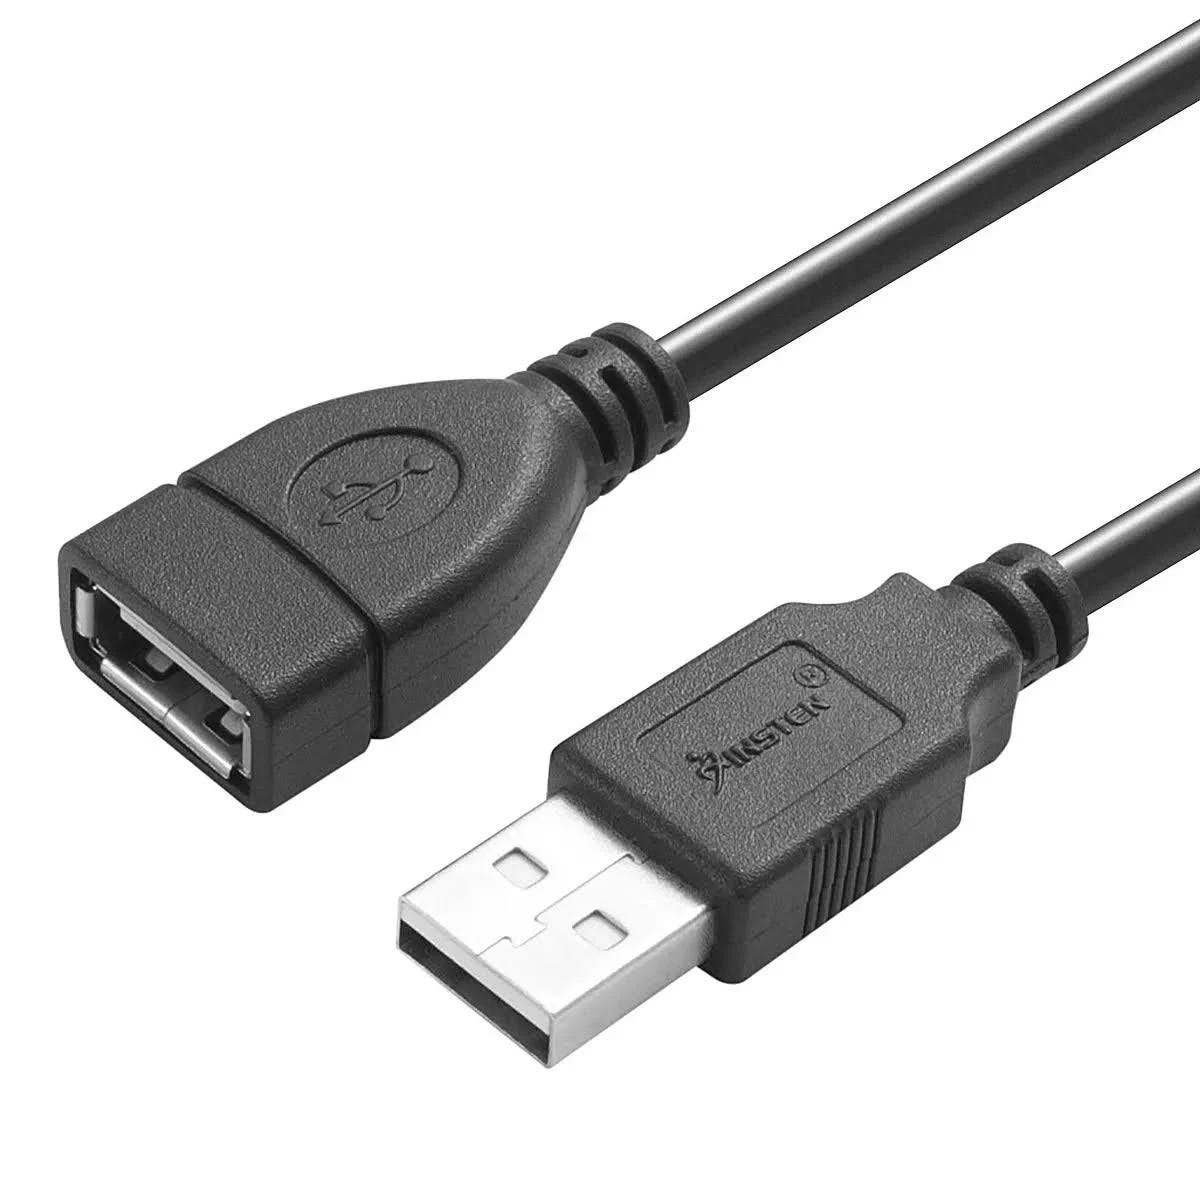 25' Insten USB 2.0 Type A Extension Cable for High-Speed Connectivity | Image